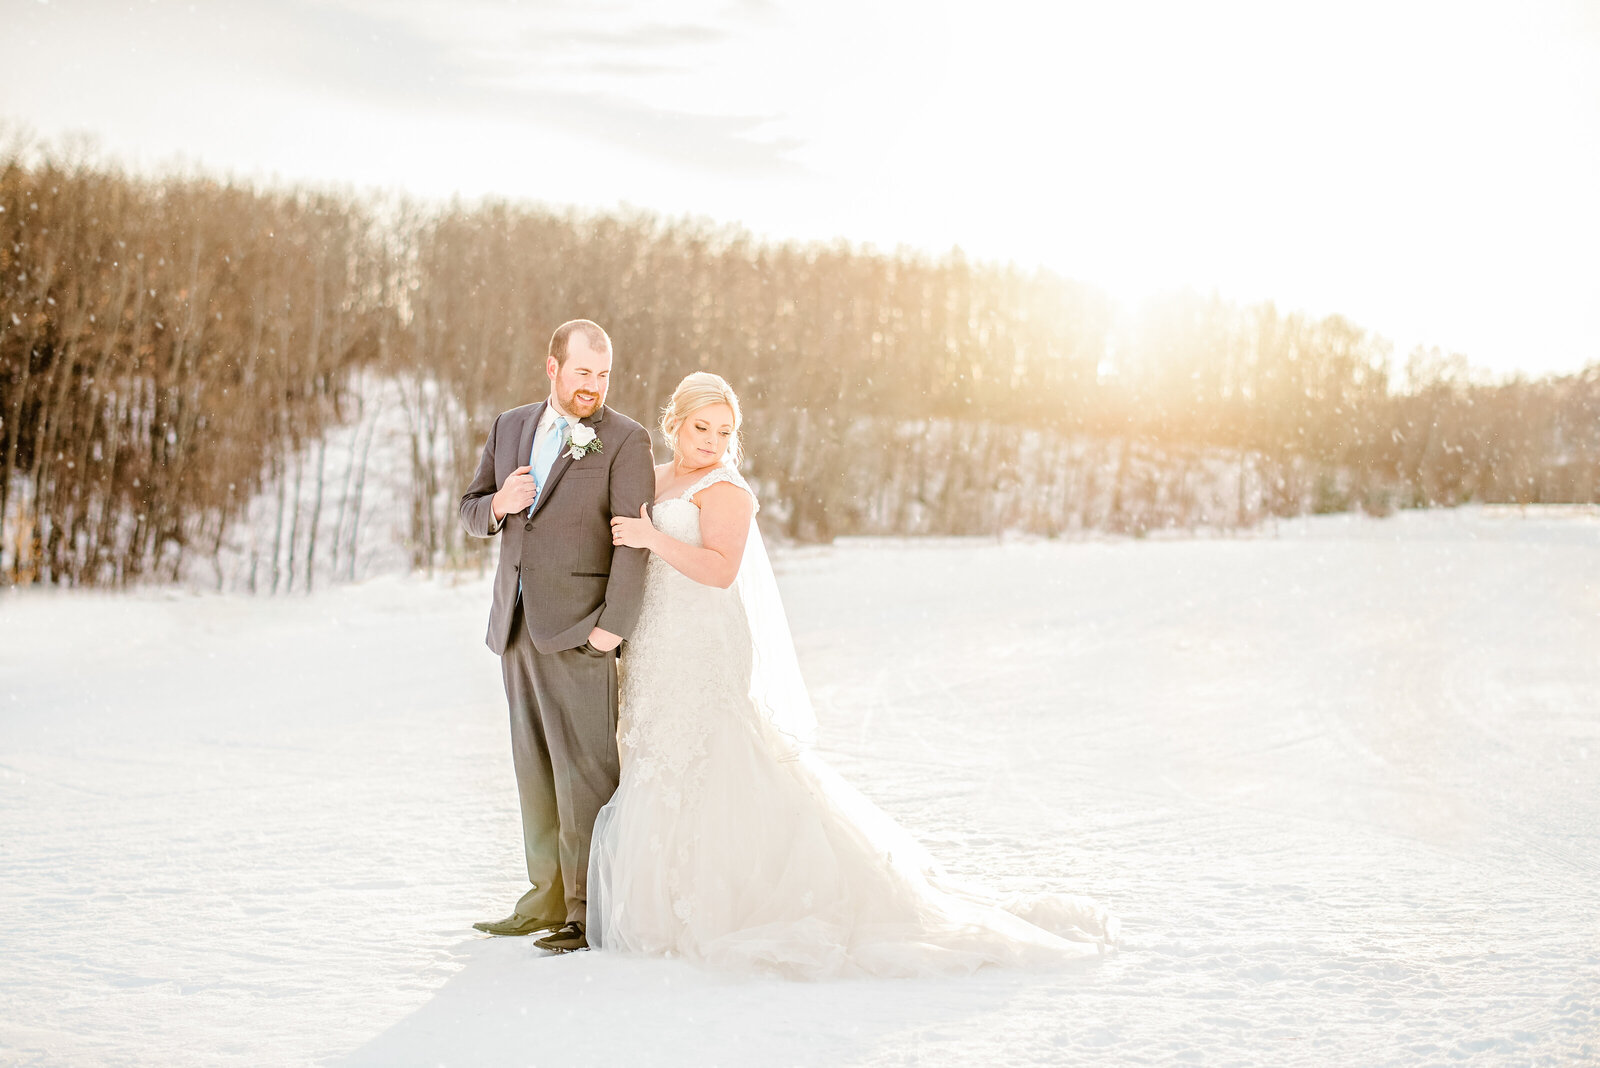 Bride and Groom on their winter wedding